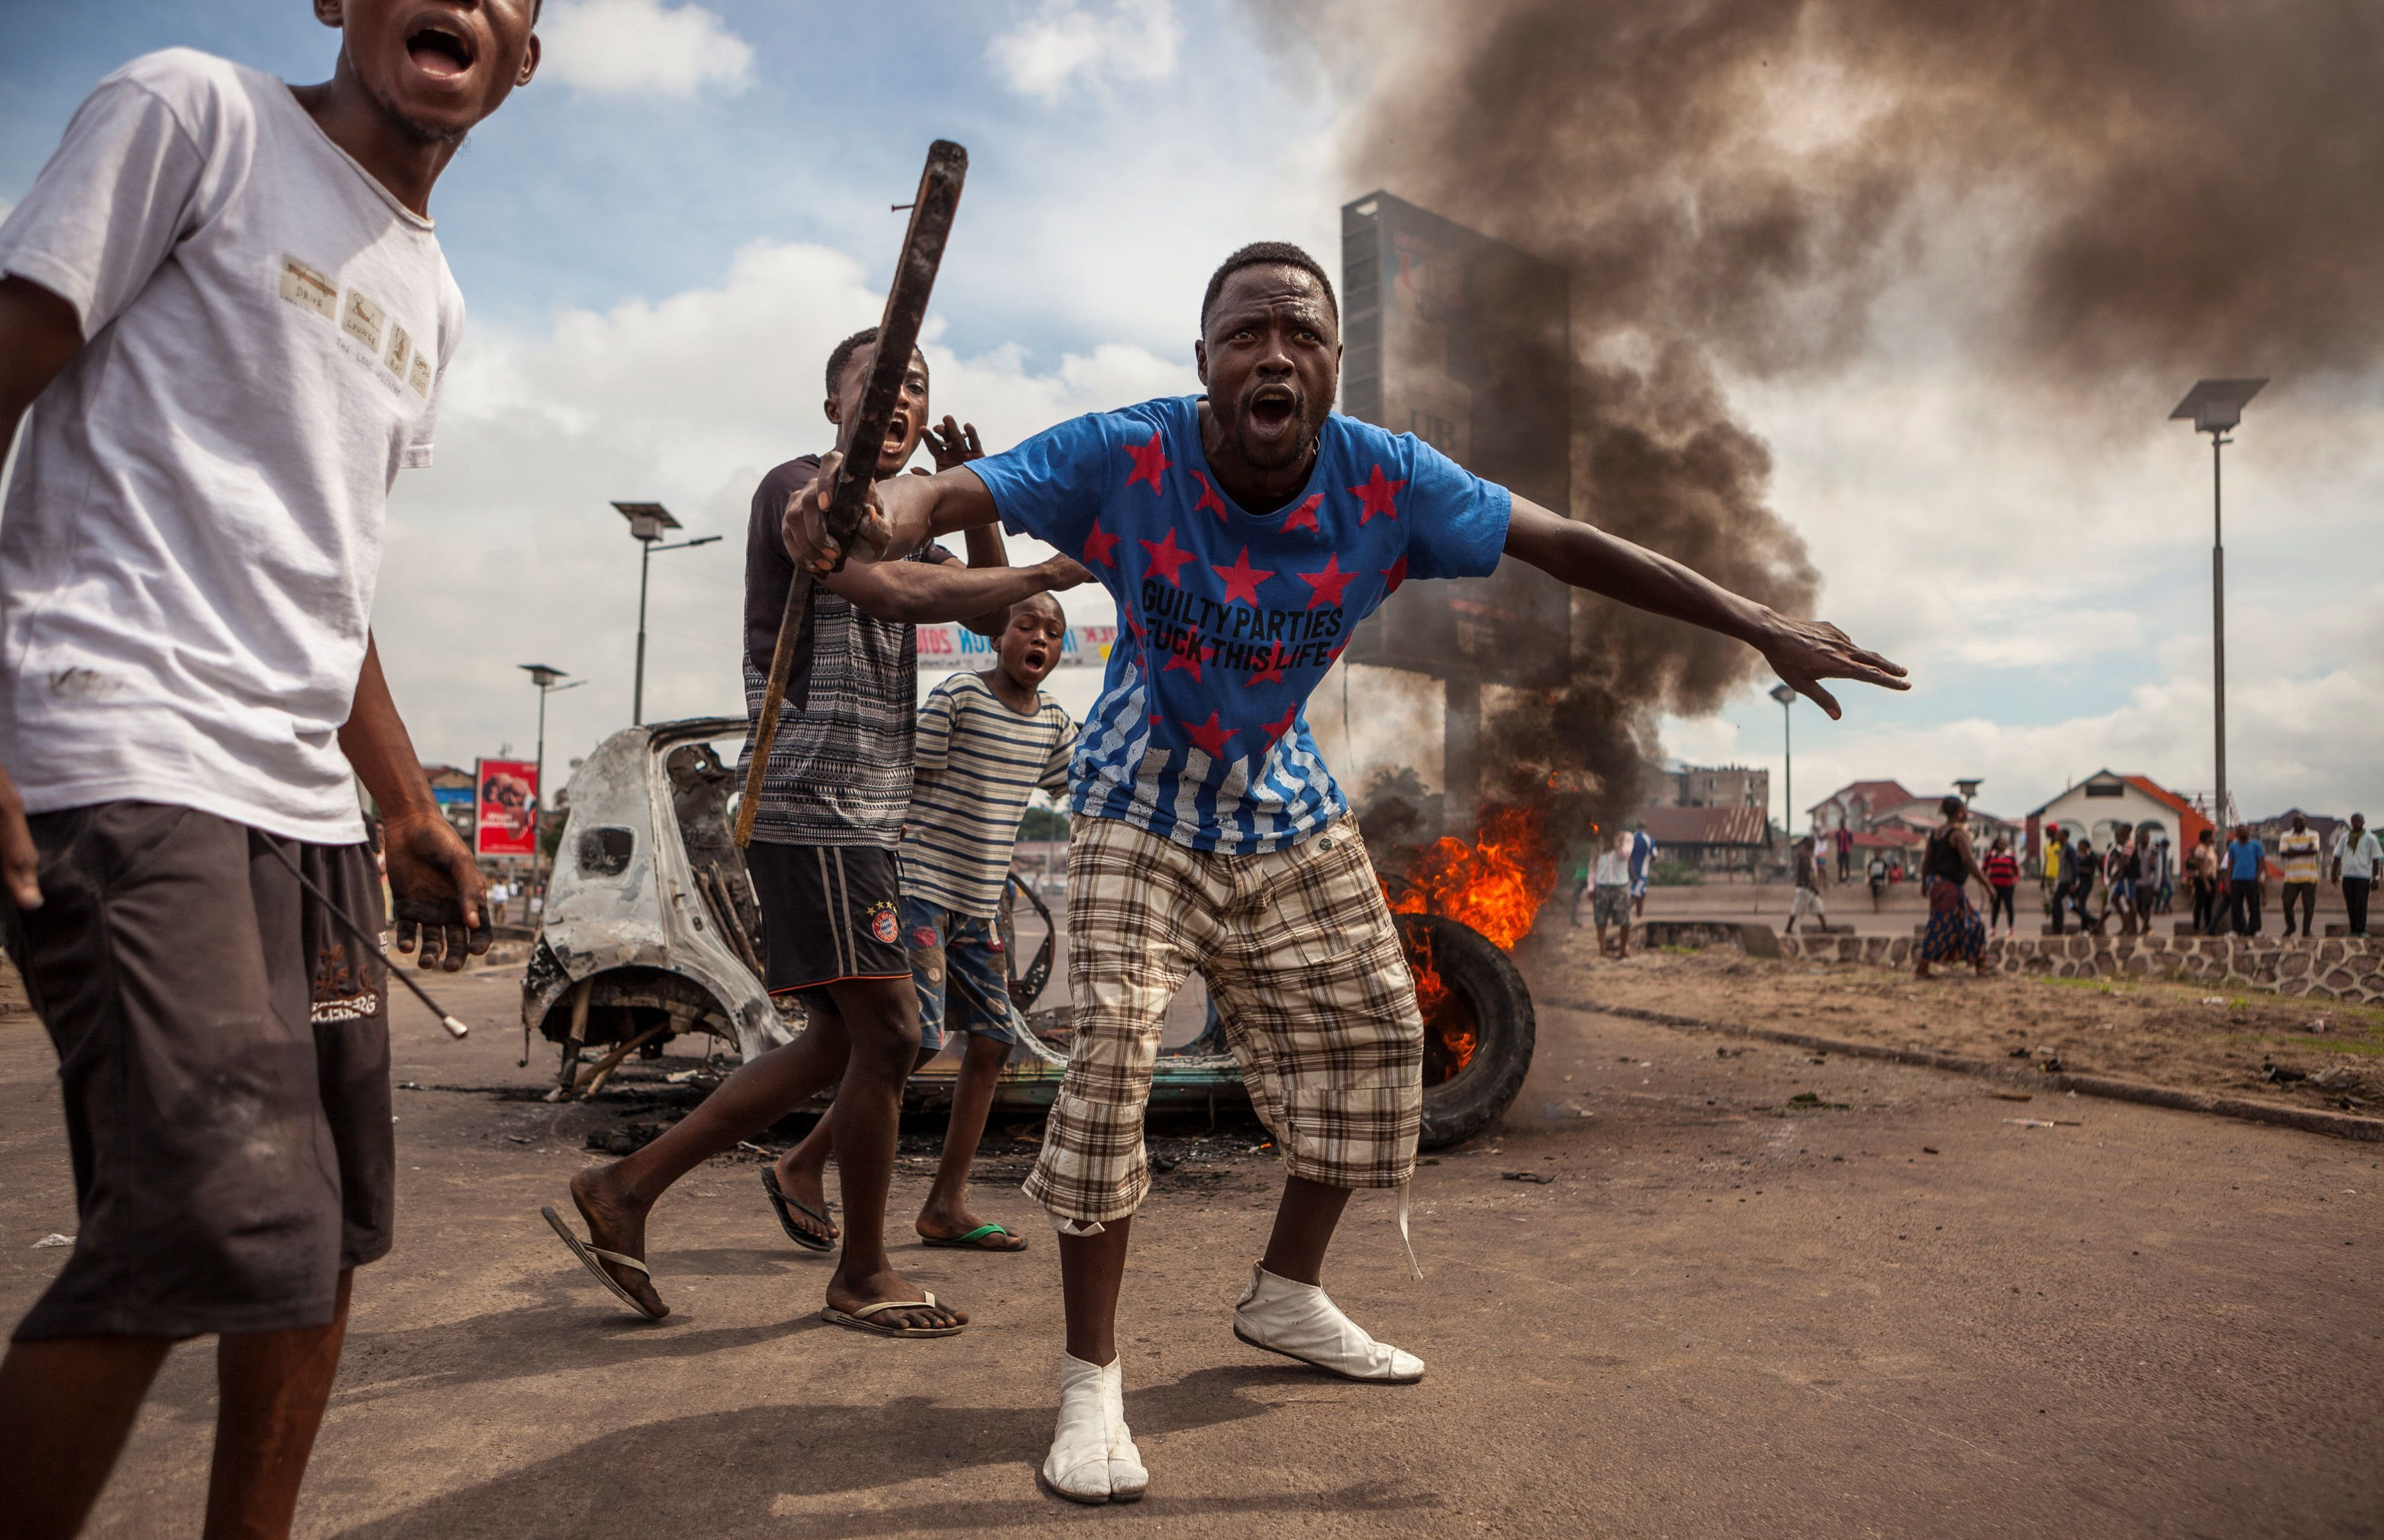 Demonstrators gather in front of a burning car during an opposition rally in Kinshasa